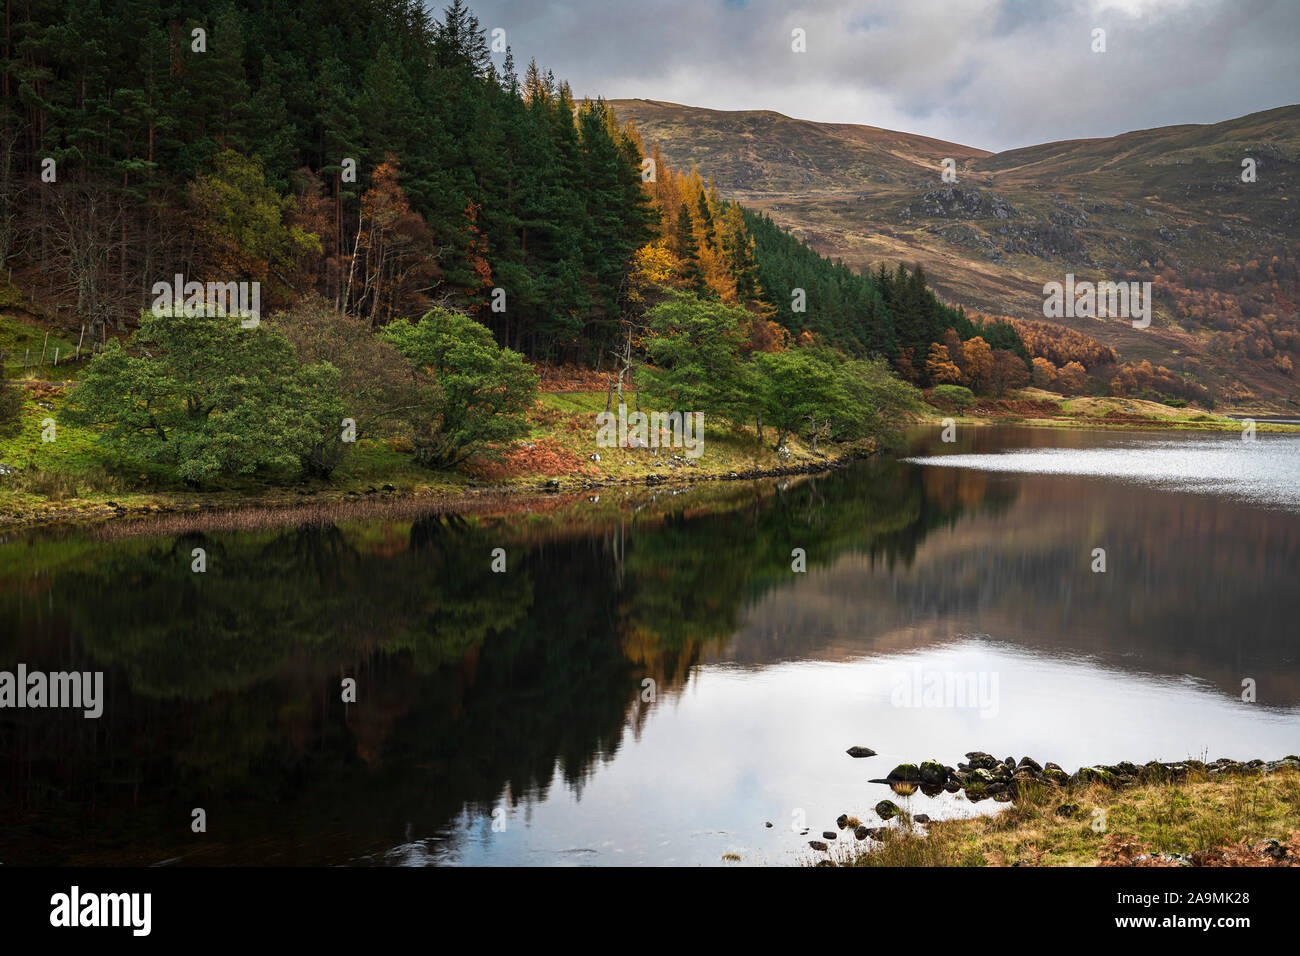 An autumnal HDR image of Loch Killin in the Monadhliath Mountains, Highlands, Scotland. 05 November 2019 Stock Photo